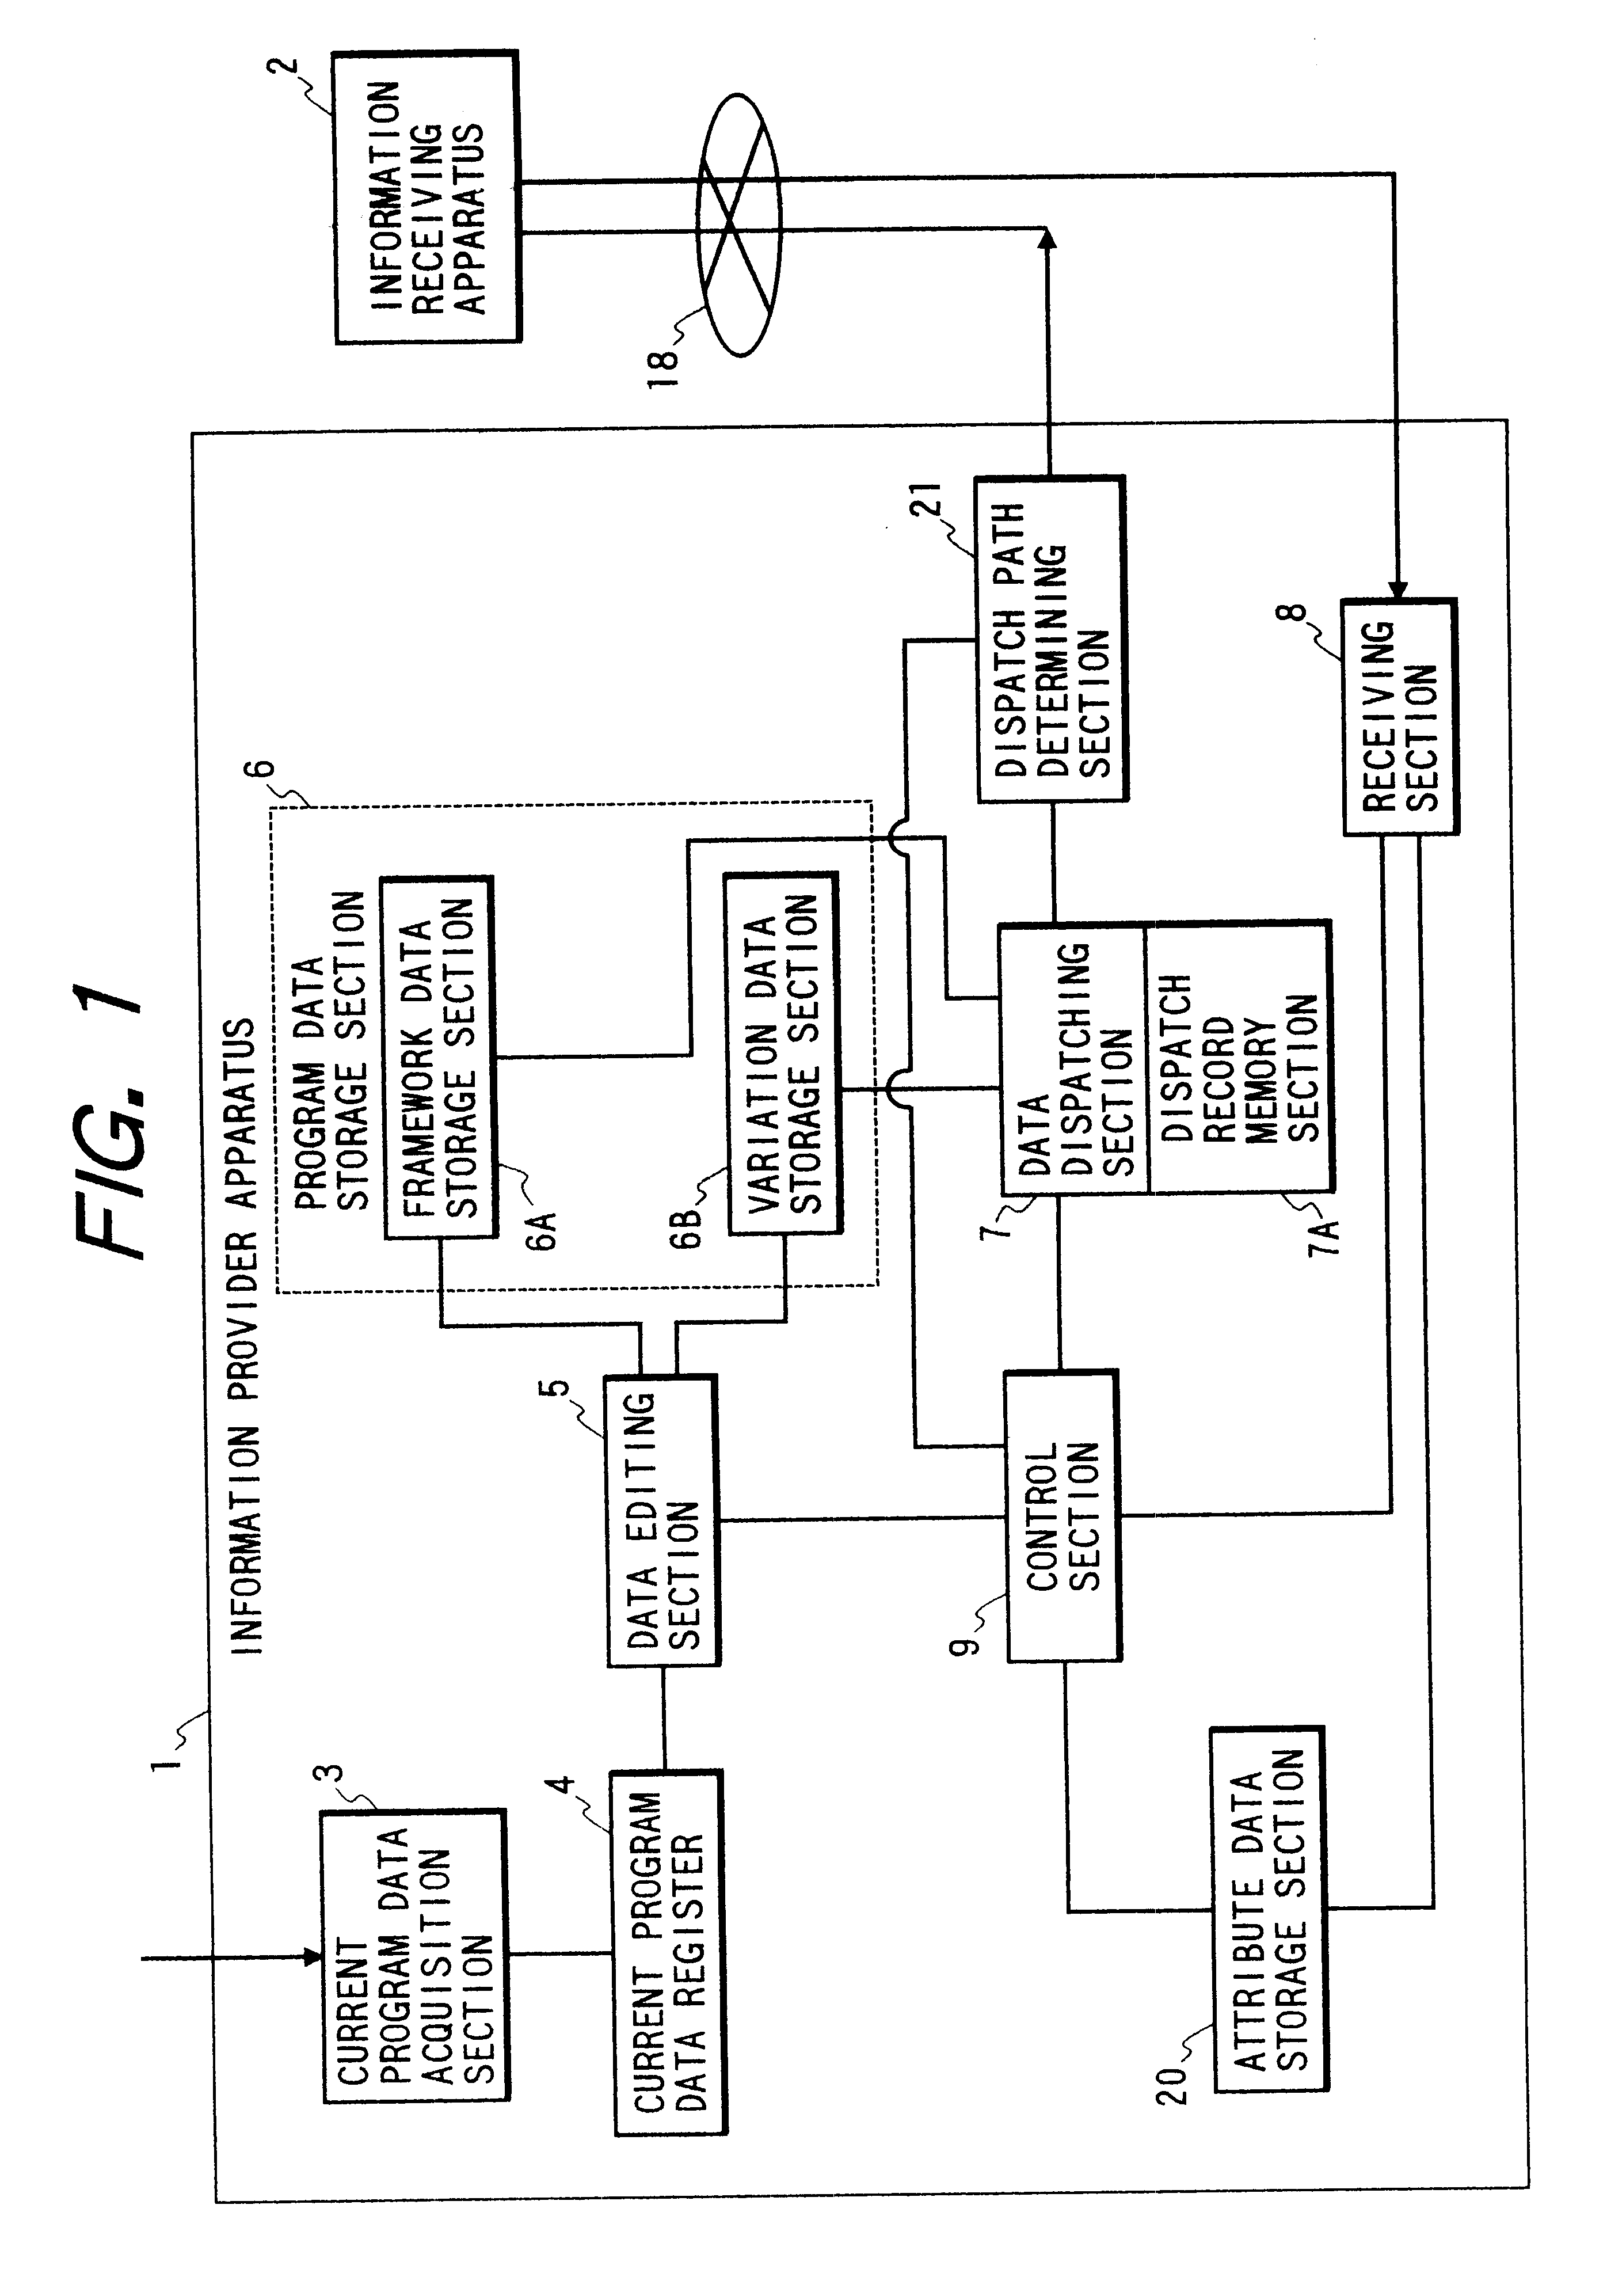 Information providing method which enables data communication costs to be reduced, and information providing system for implementing the method